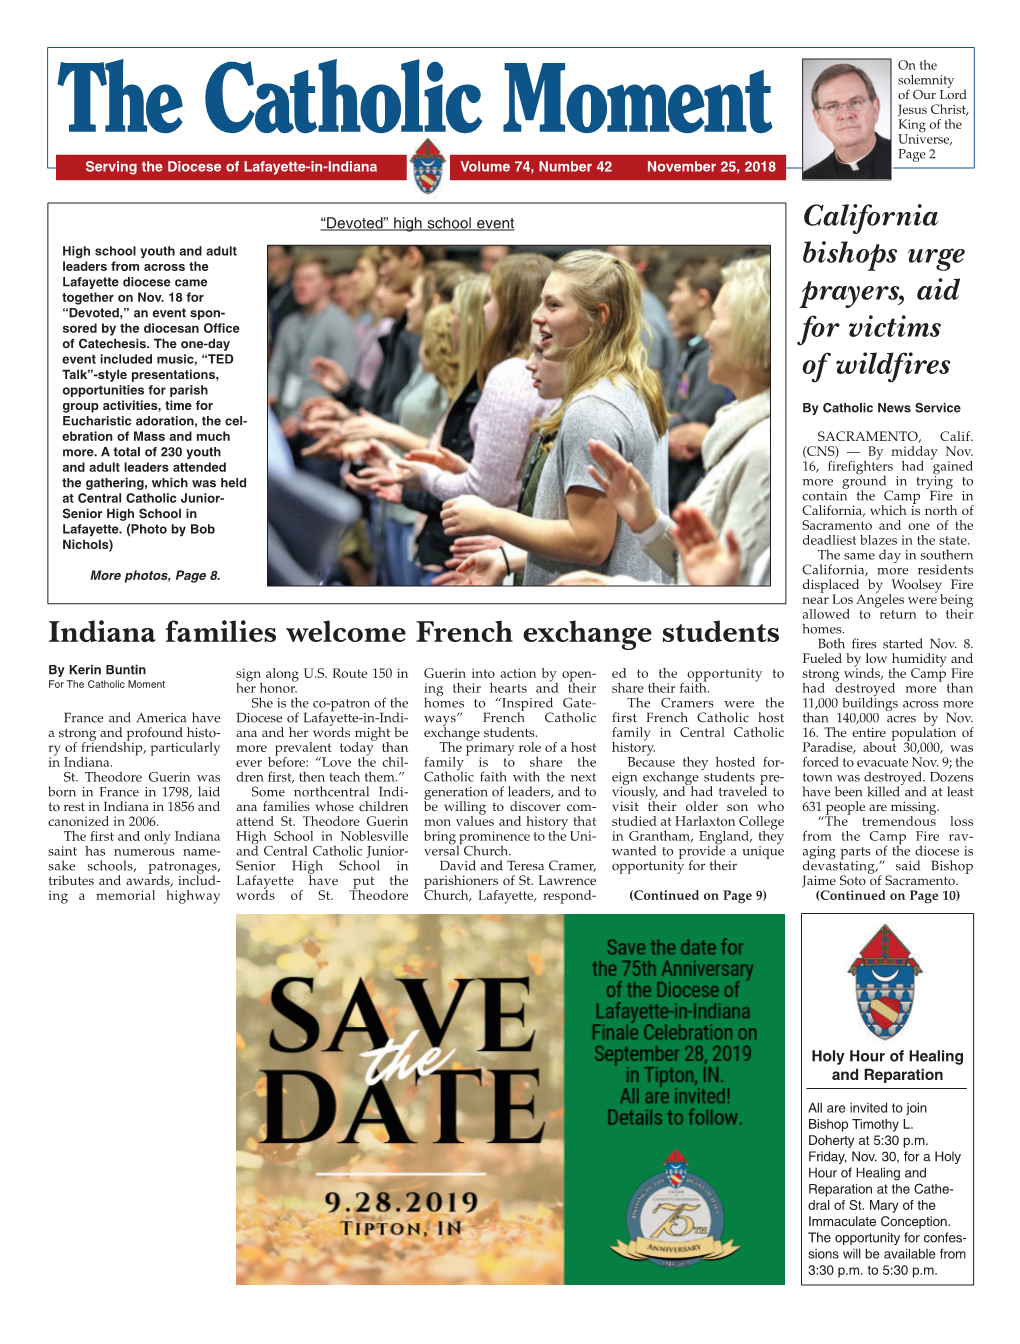 Indiana Families Welcome French Exchange Students California